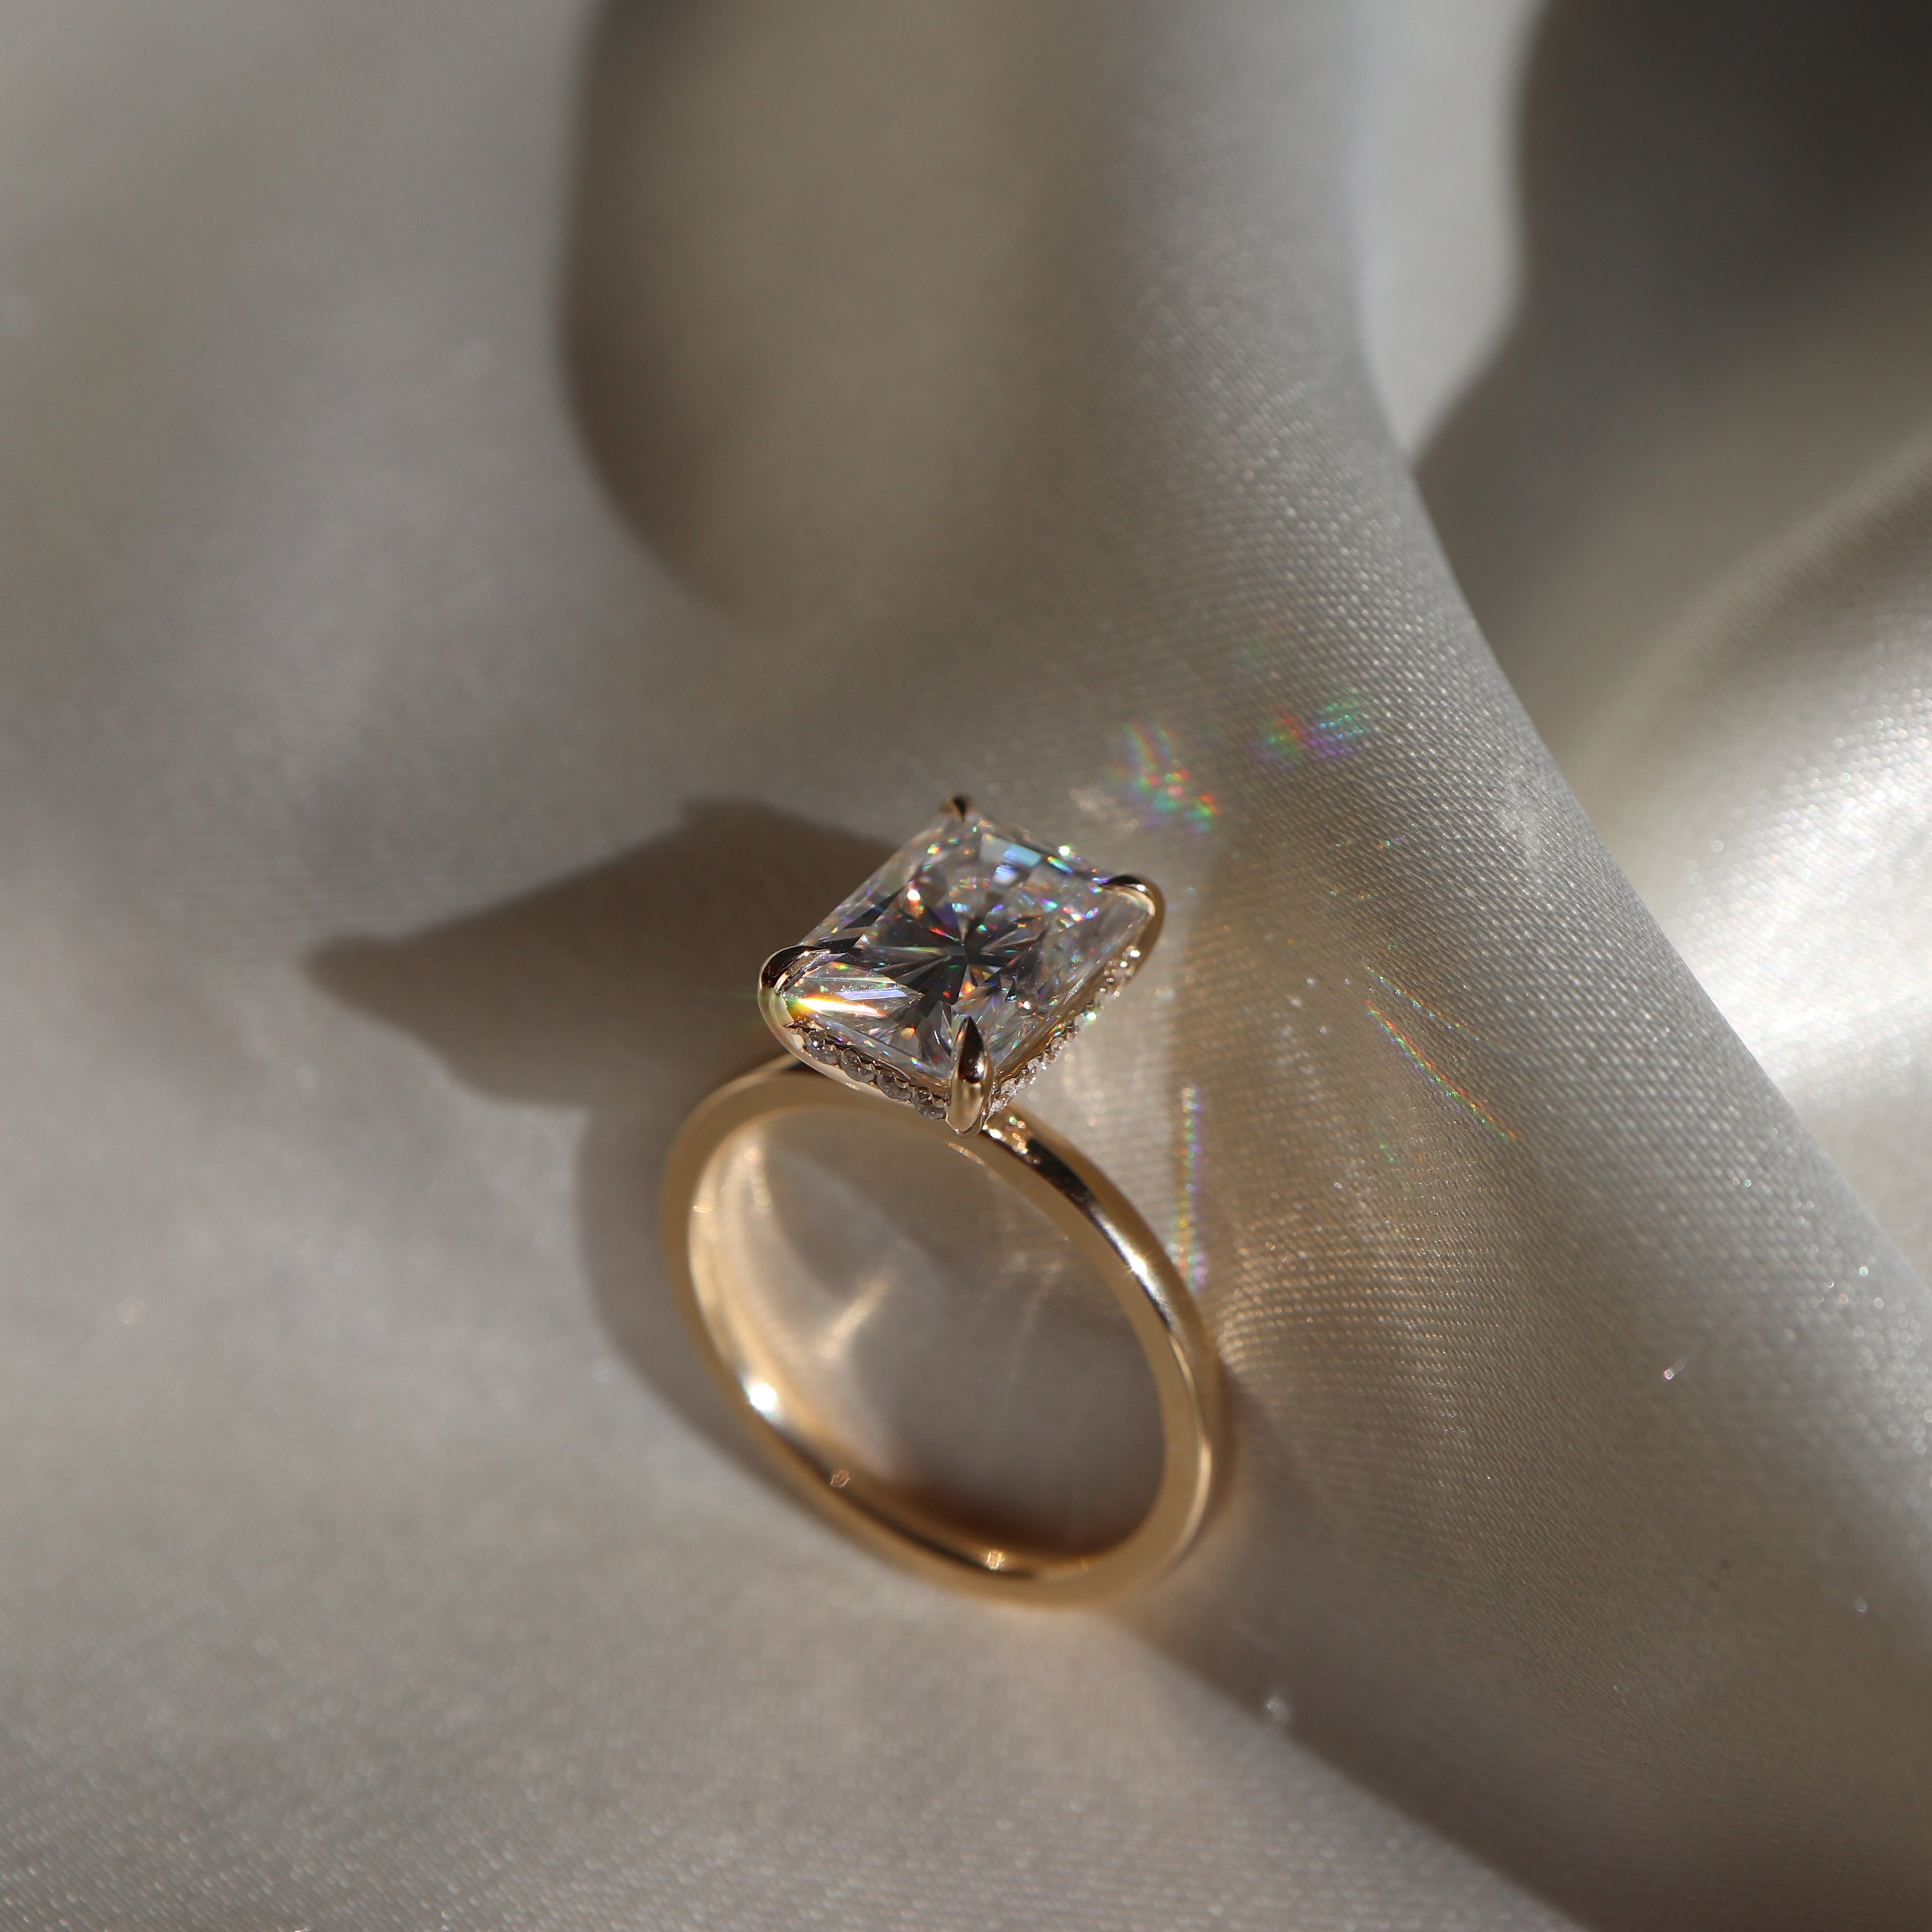 The Vienna Ring - Radiant Solitaire